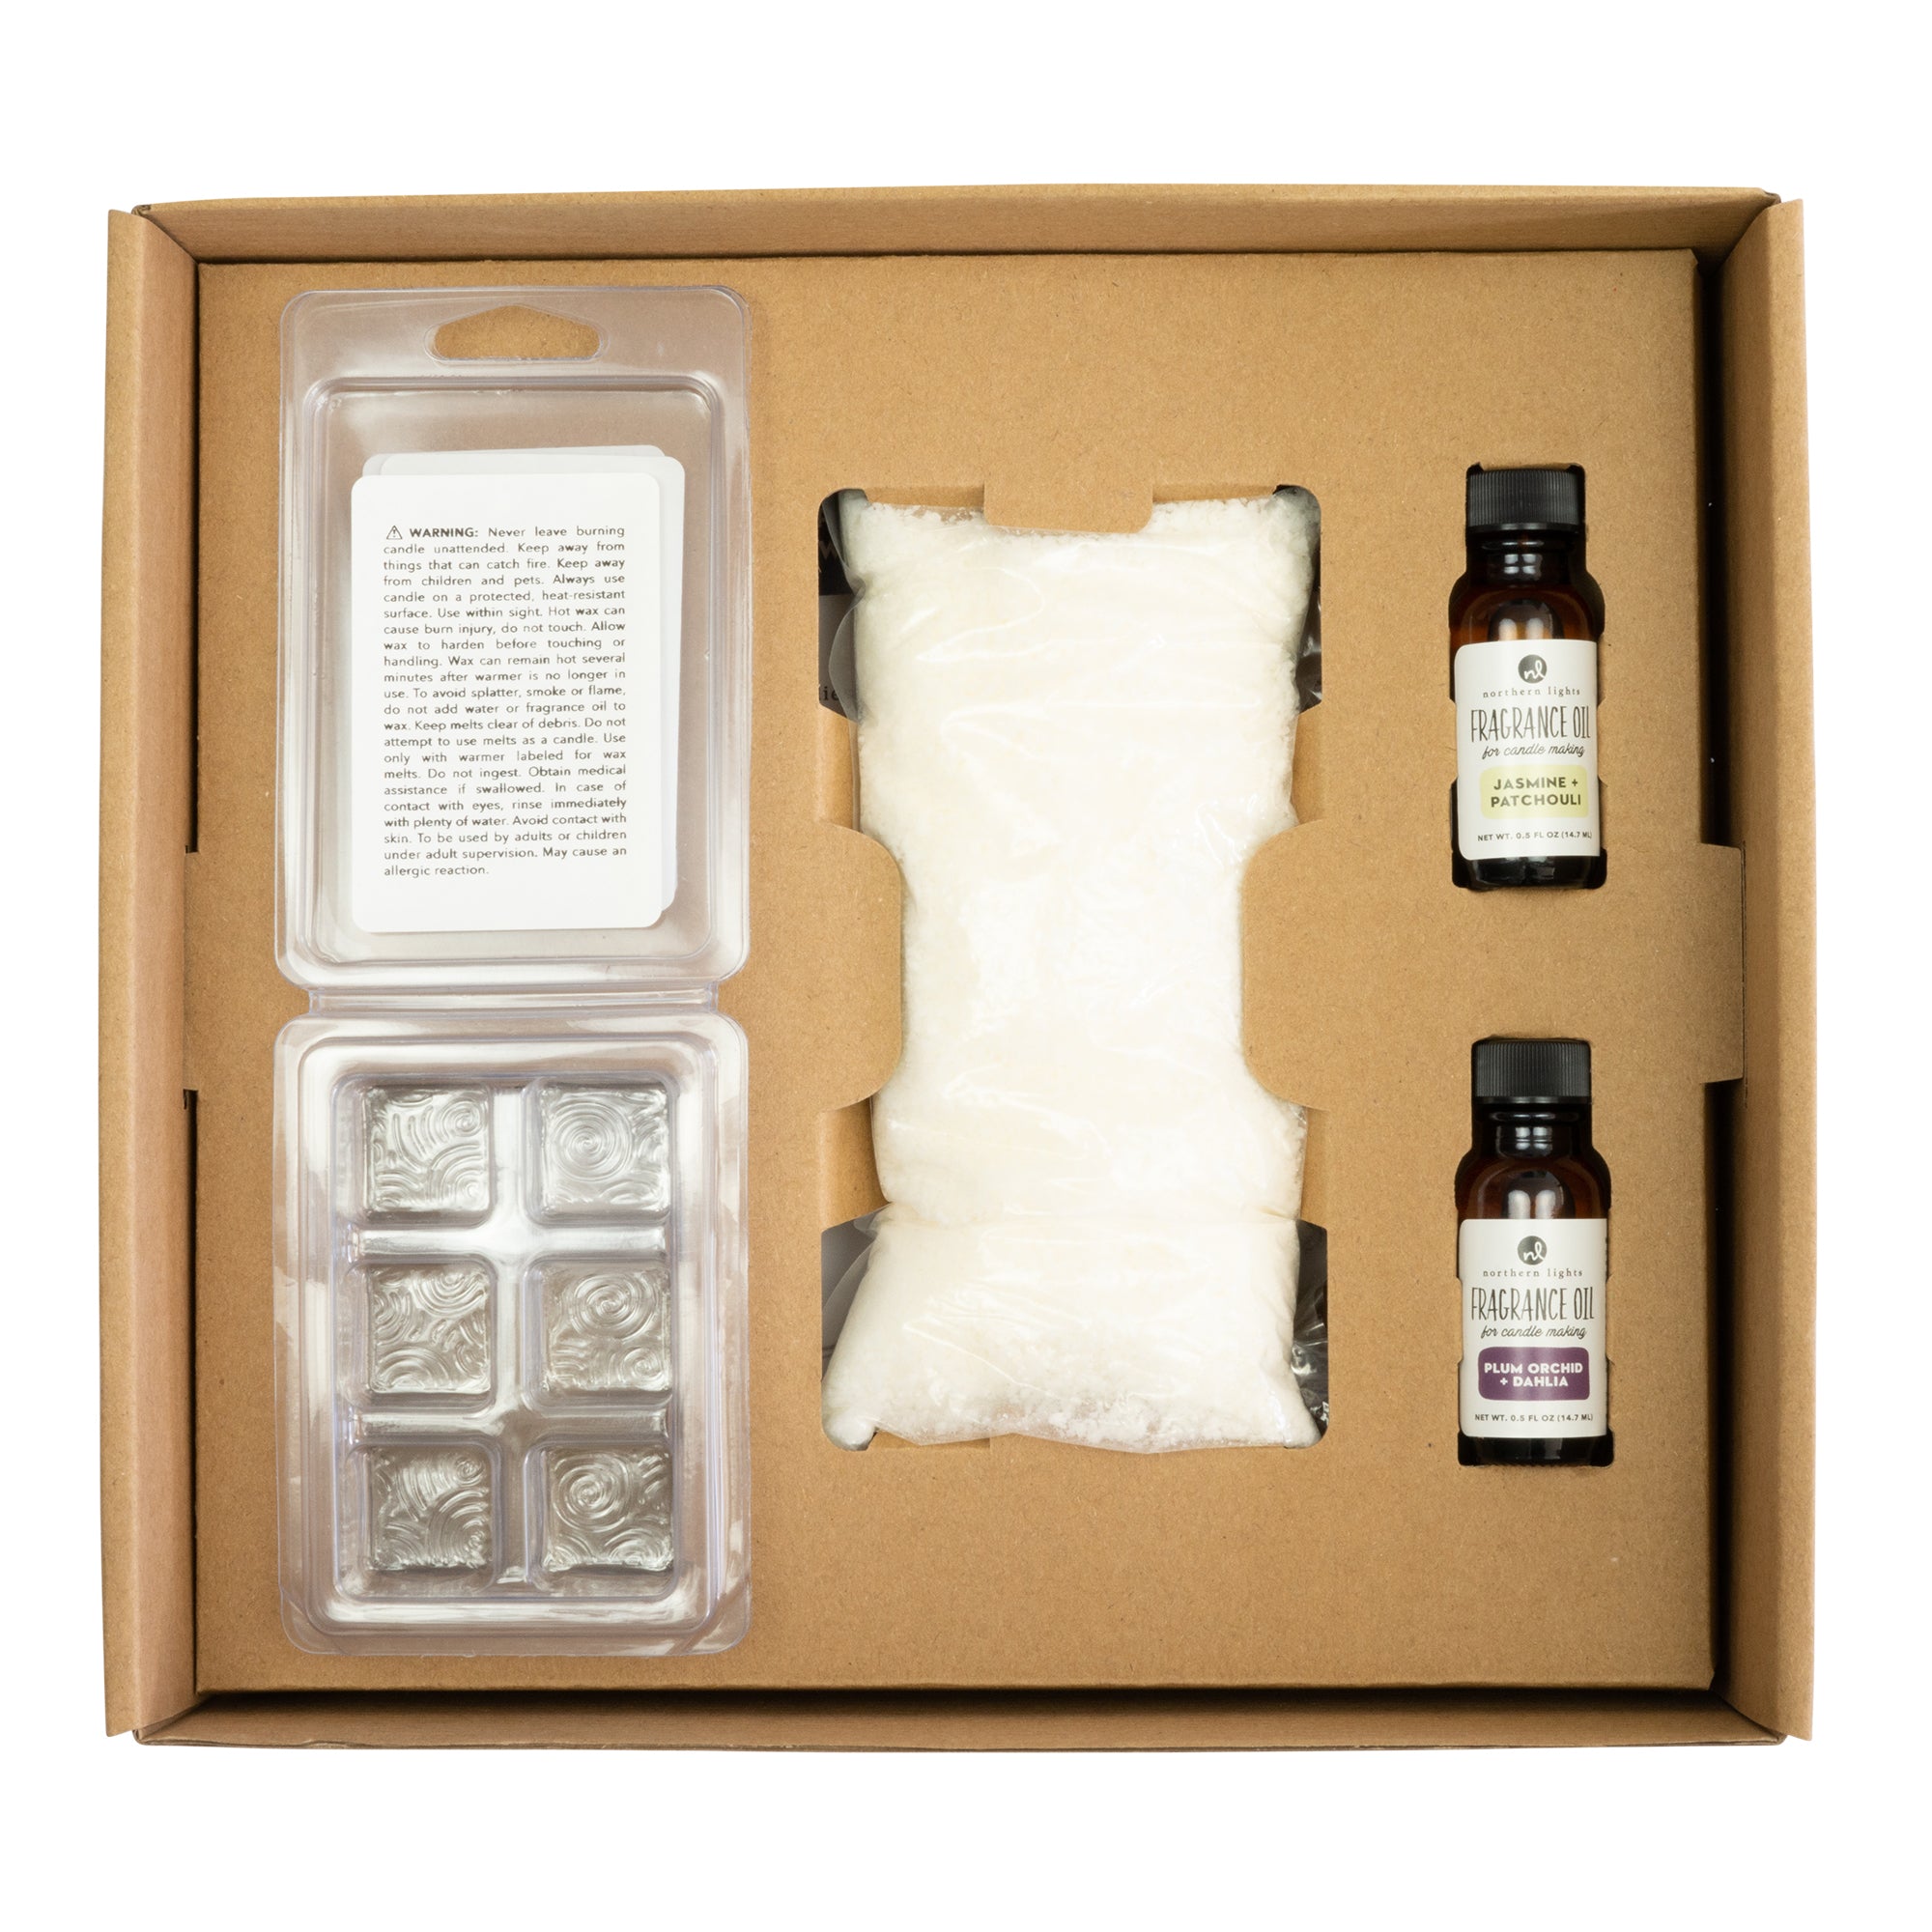 Candle and Wax Melt Business Kit